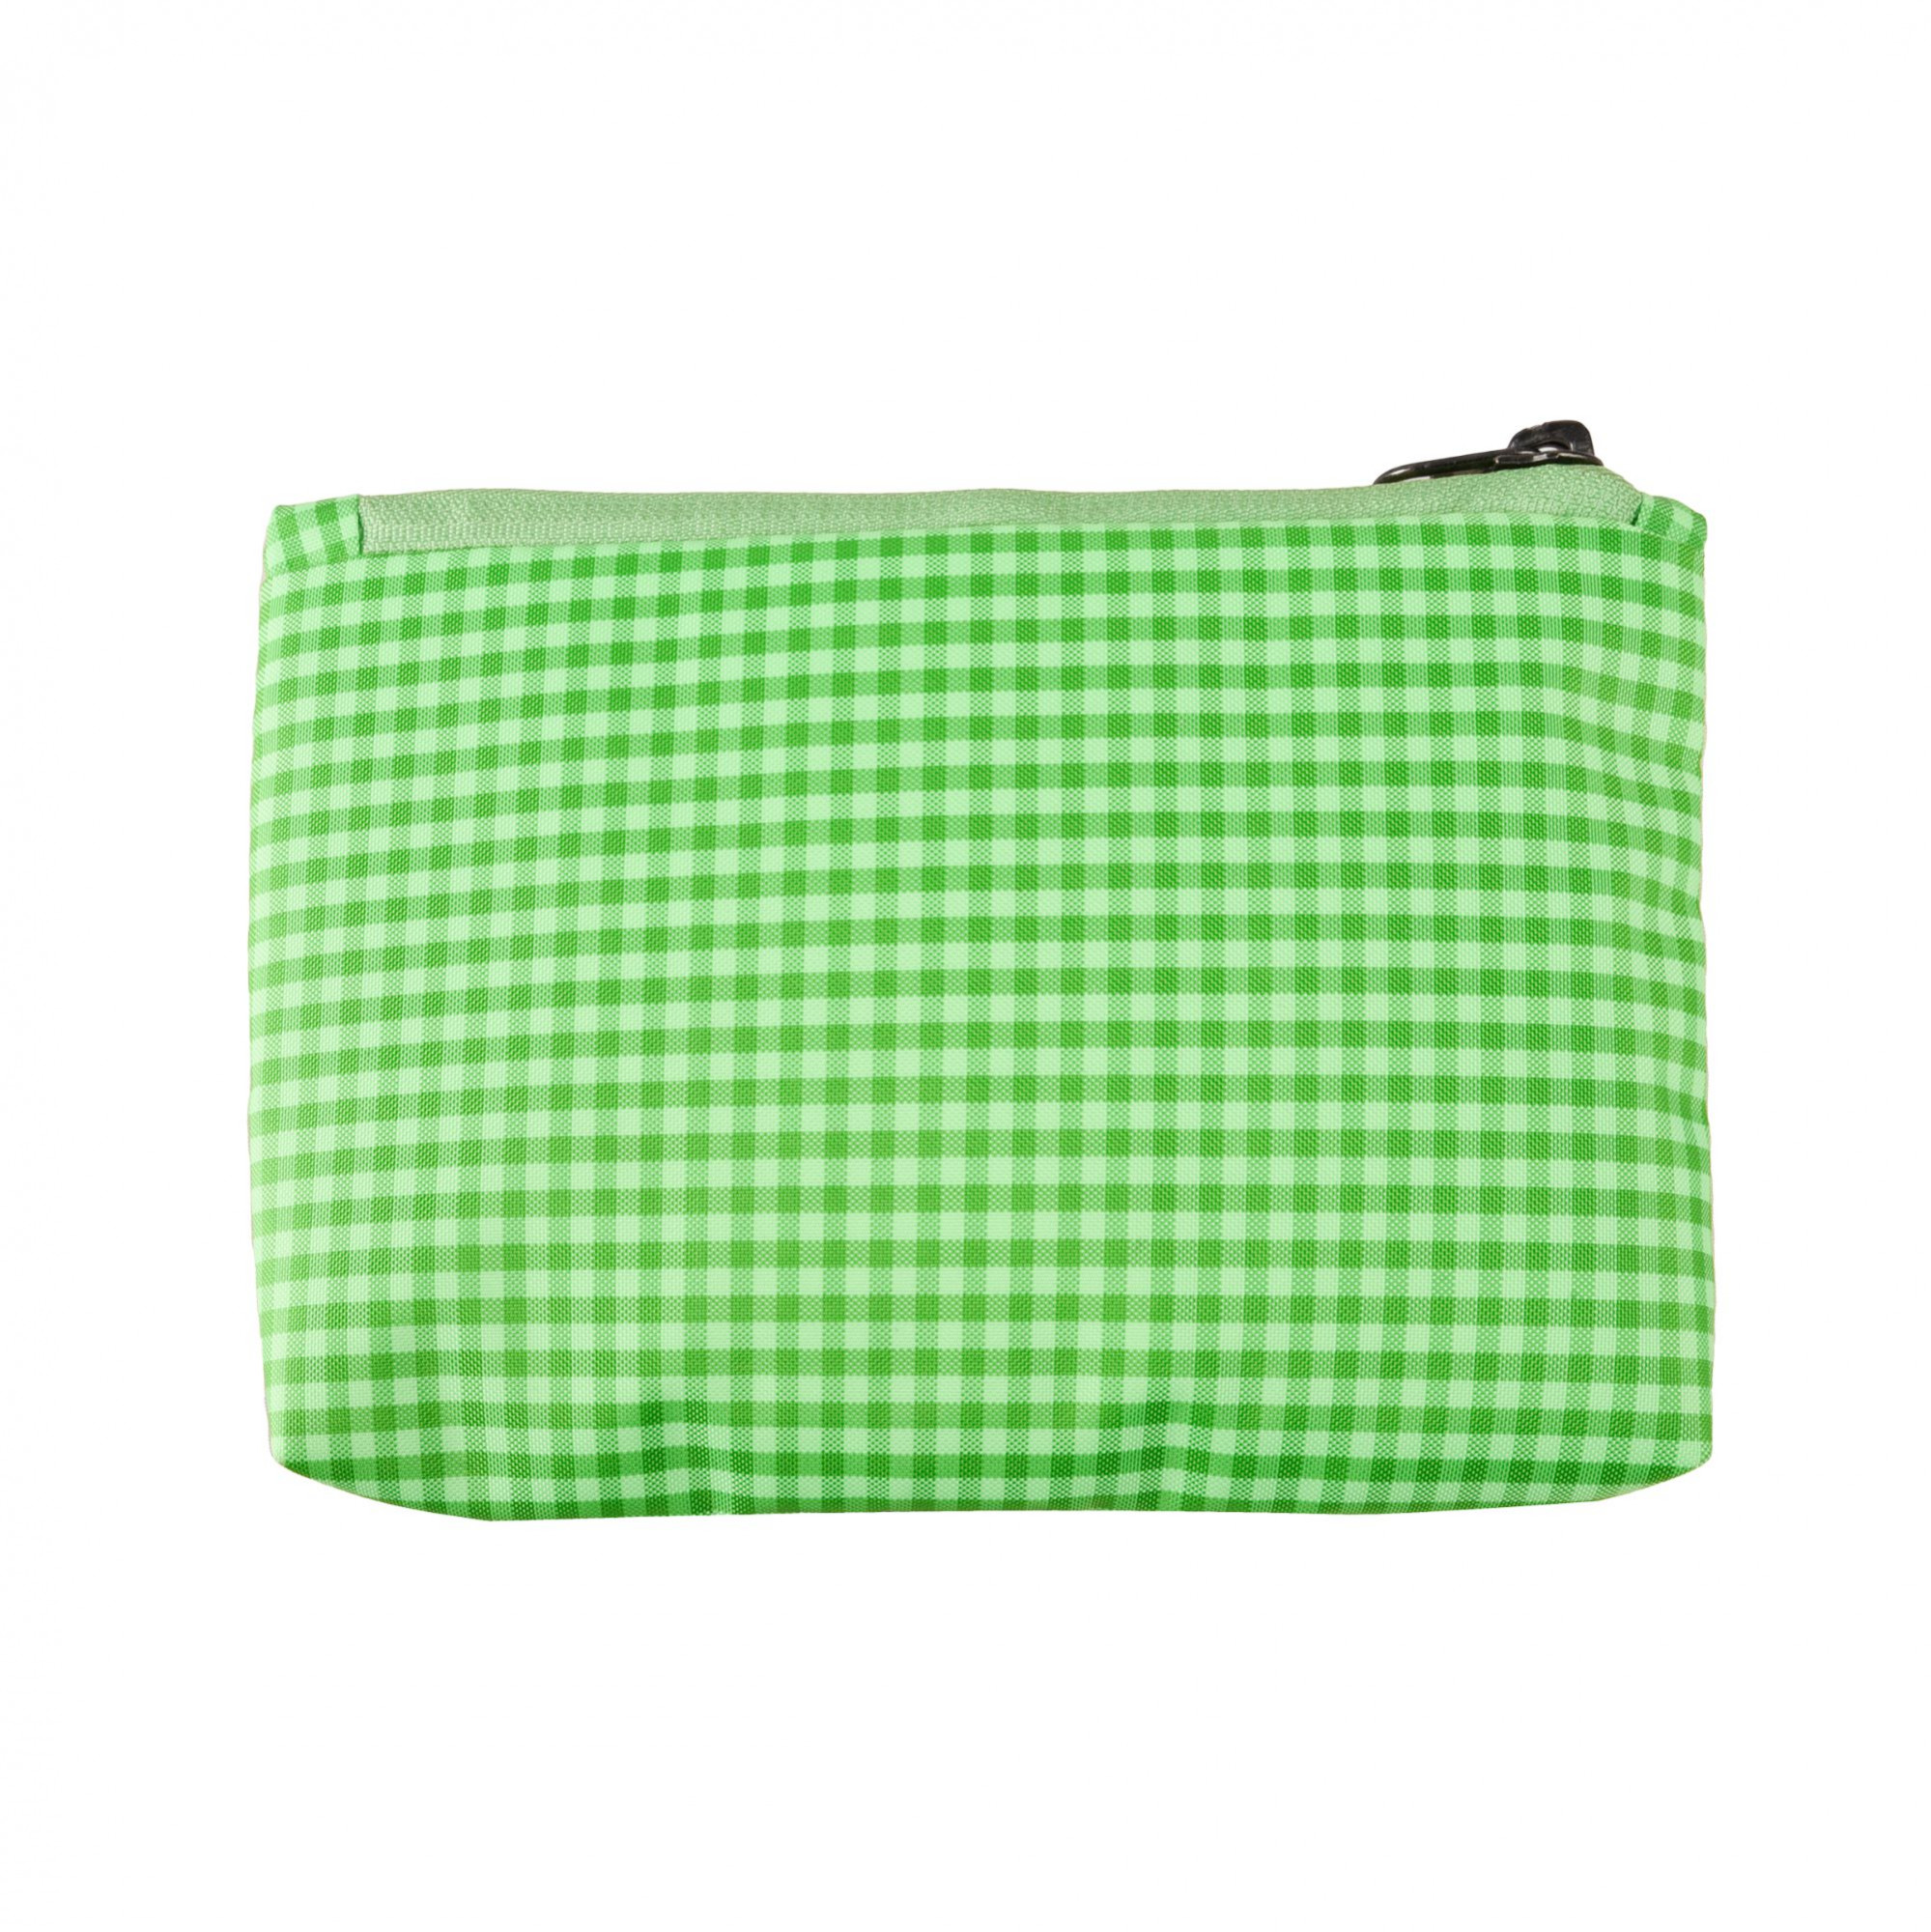 Kuber Industries Pencil Pouch | Square Stationary Pouch | Pen-Pencil Box for Kids | School Geometry Pouch | Pencil Utility Bag | Marvel Pencil Organizer | Green & Navy Blue